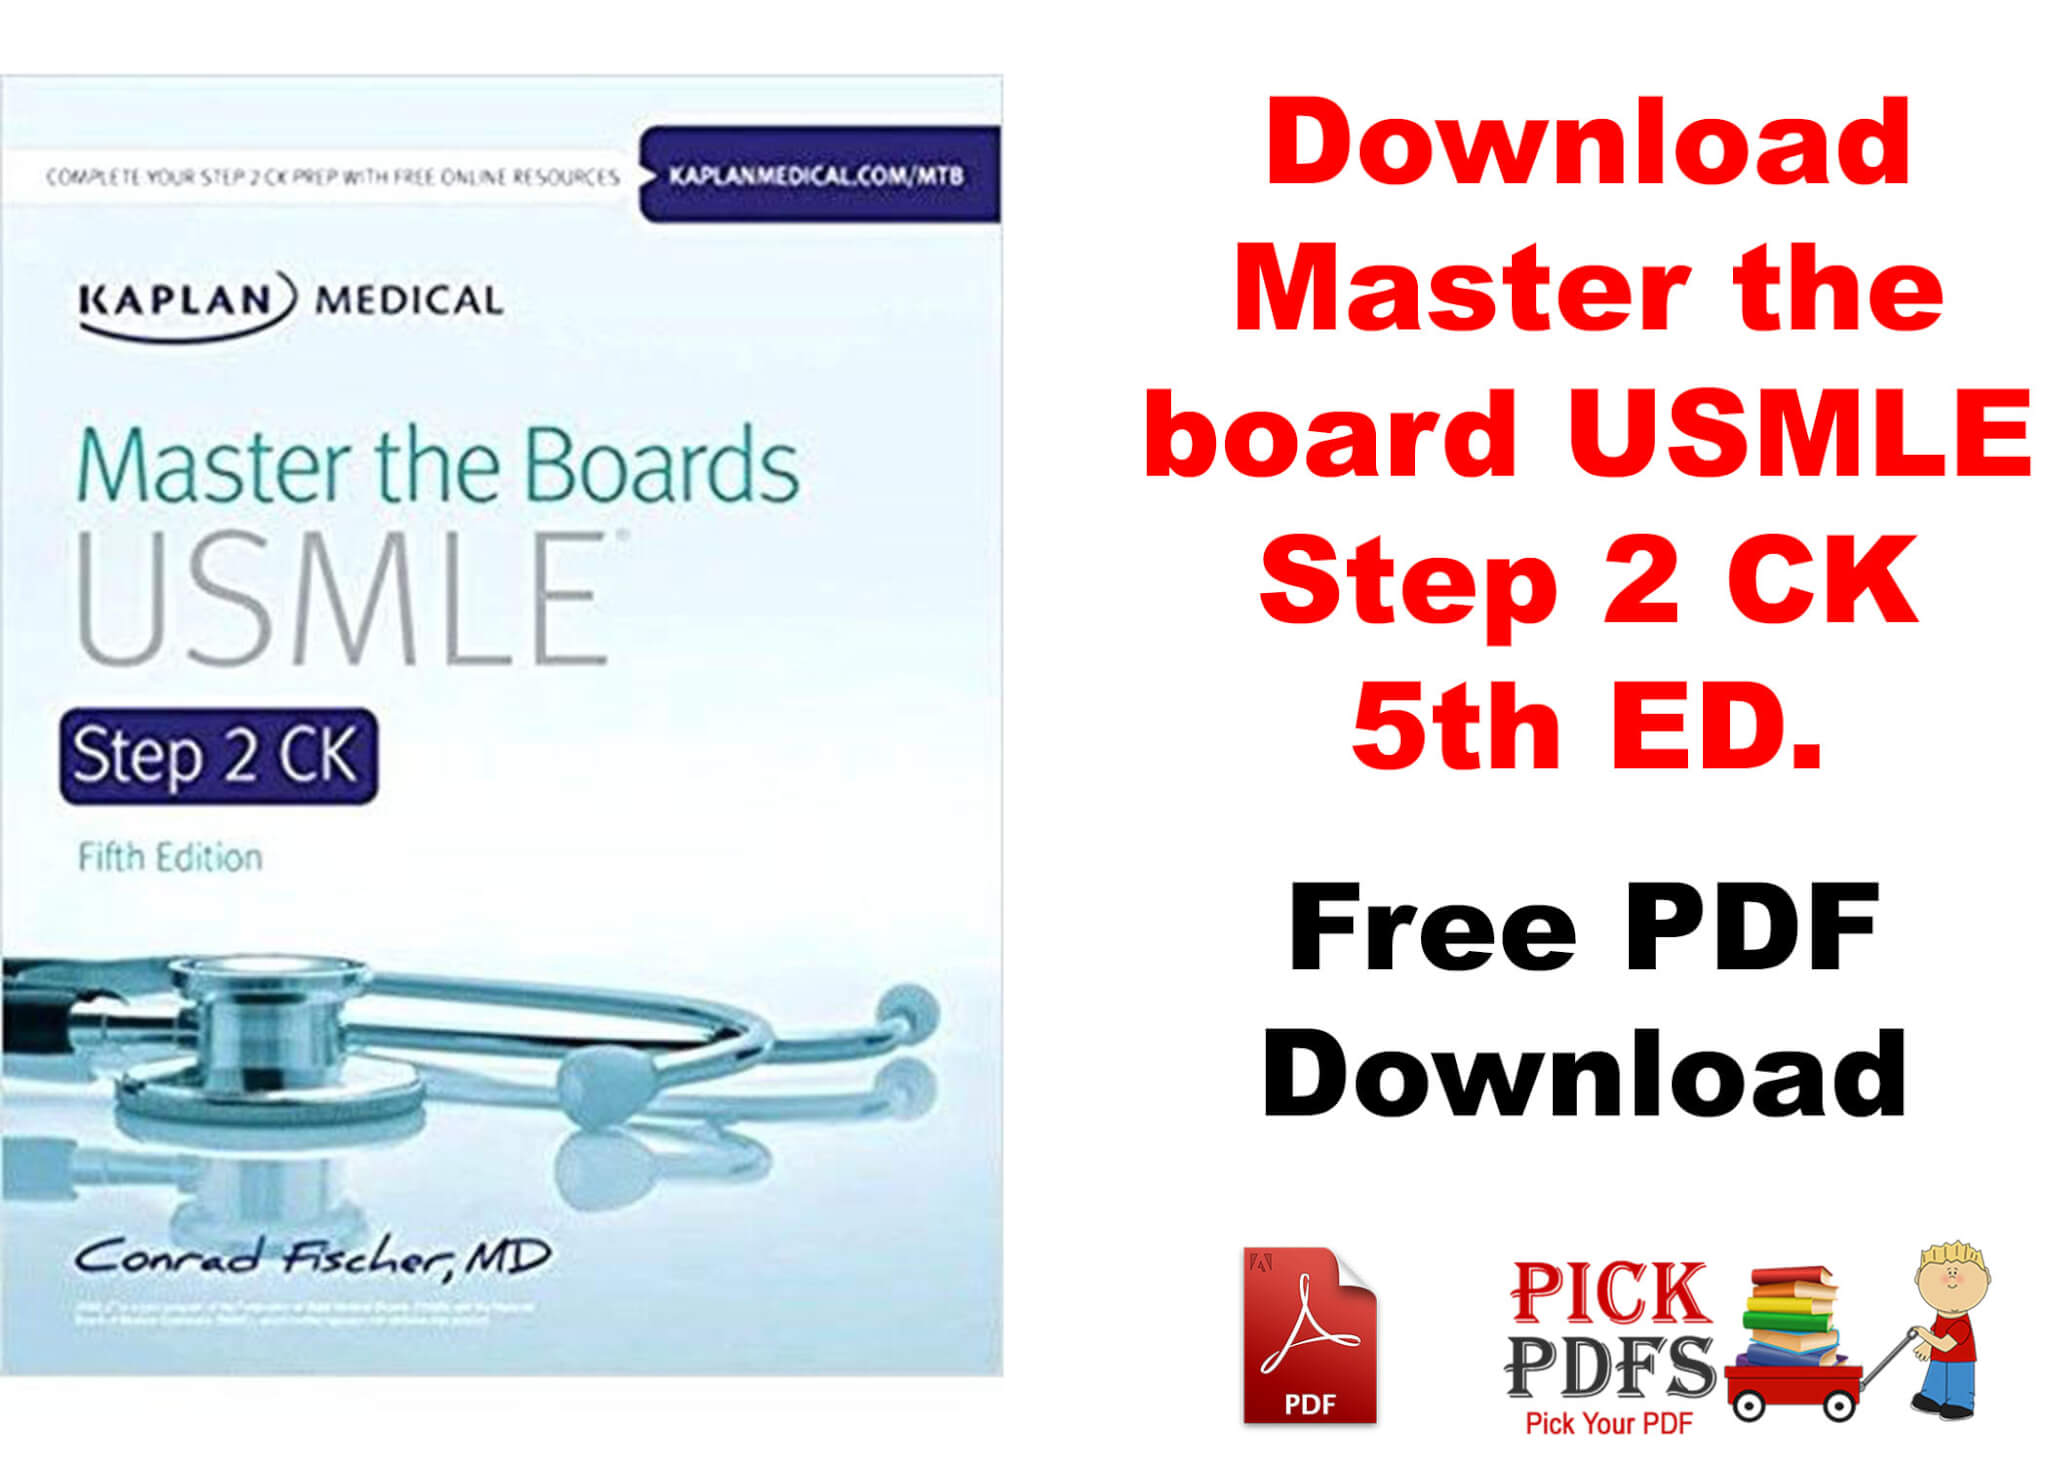 https://pickpdfs.com/master-the-boards-usmle-step-2-ck-5th-edition-pdf-free-download-direct-link/